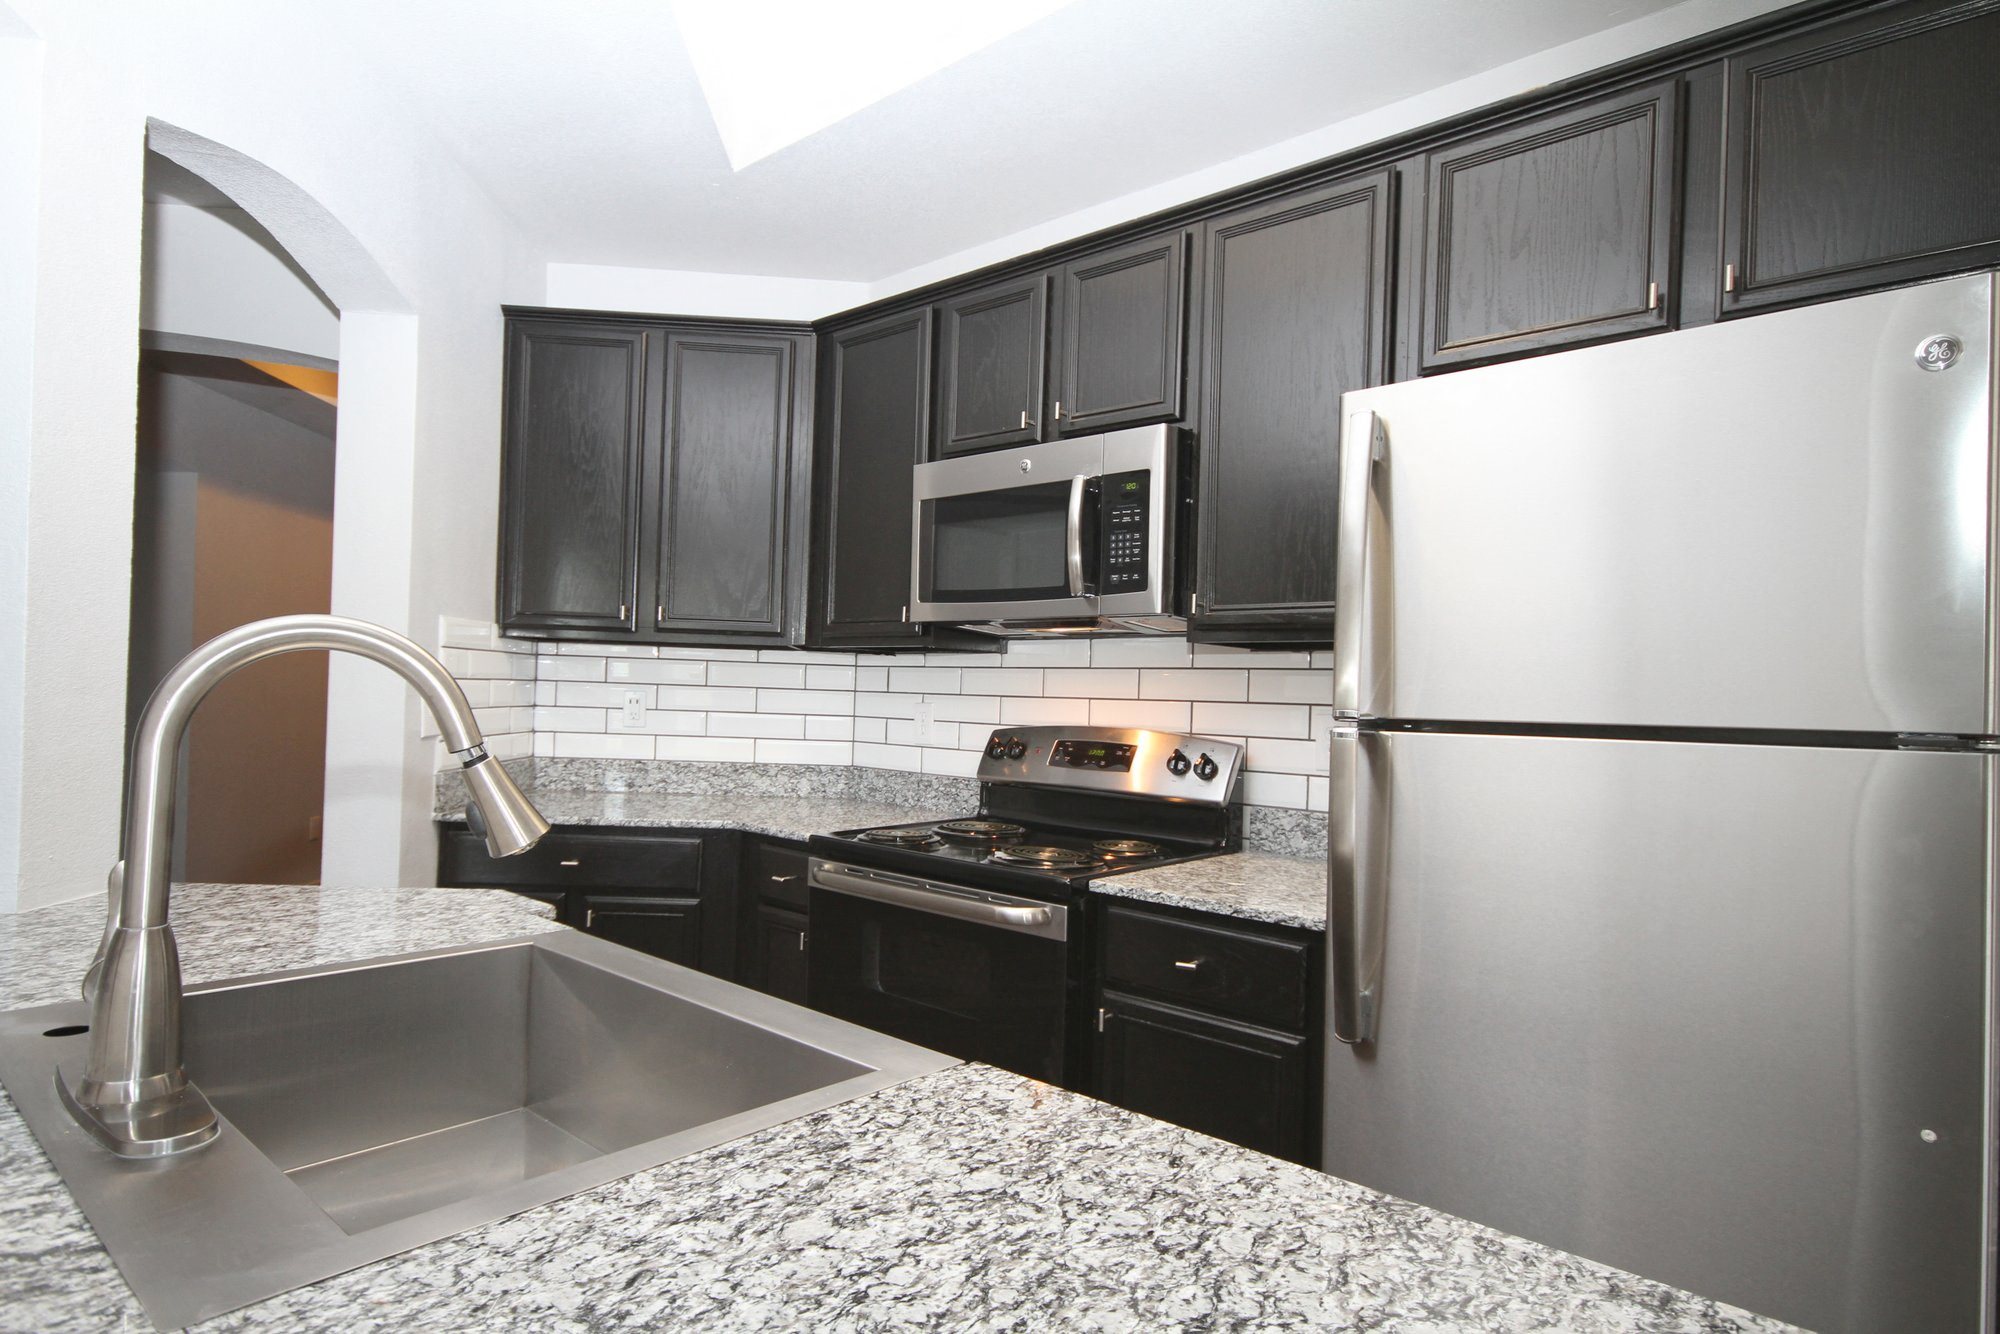 Apartments for Rent in San Antonio - Gorgeous Kitchen with Black Cabinets, Designer Backsplash, and Stainless Steel Appliances